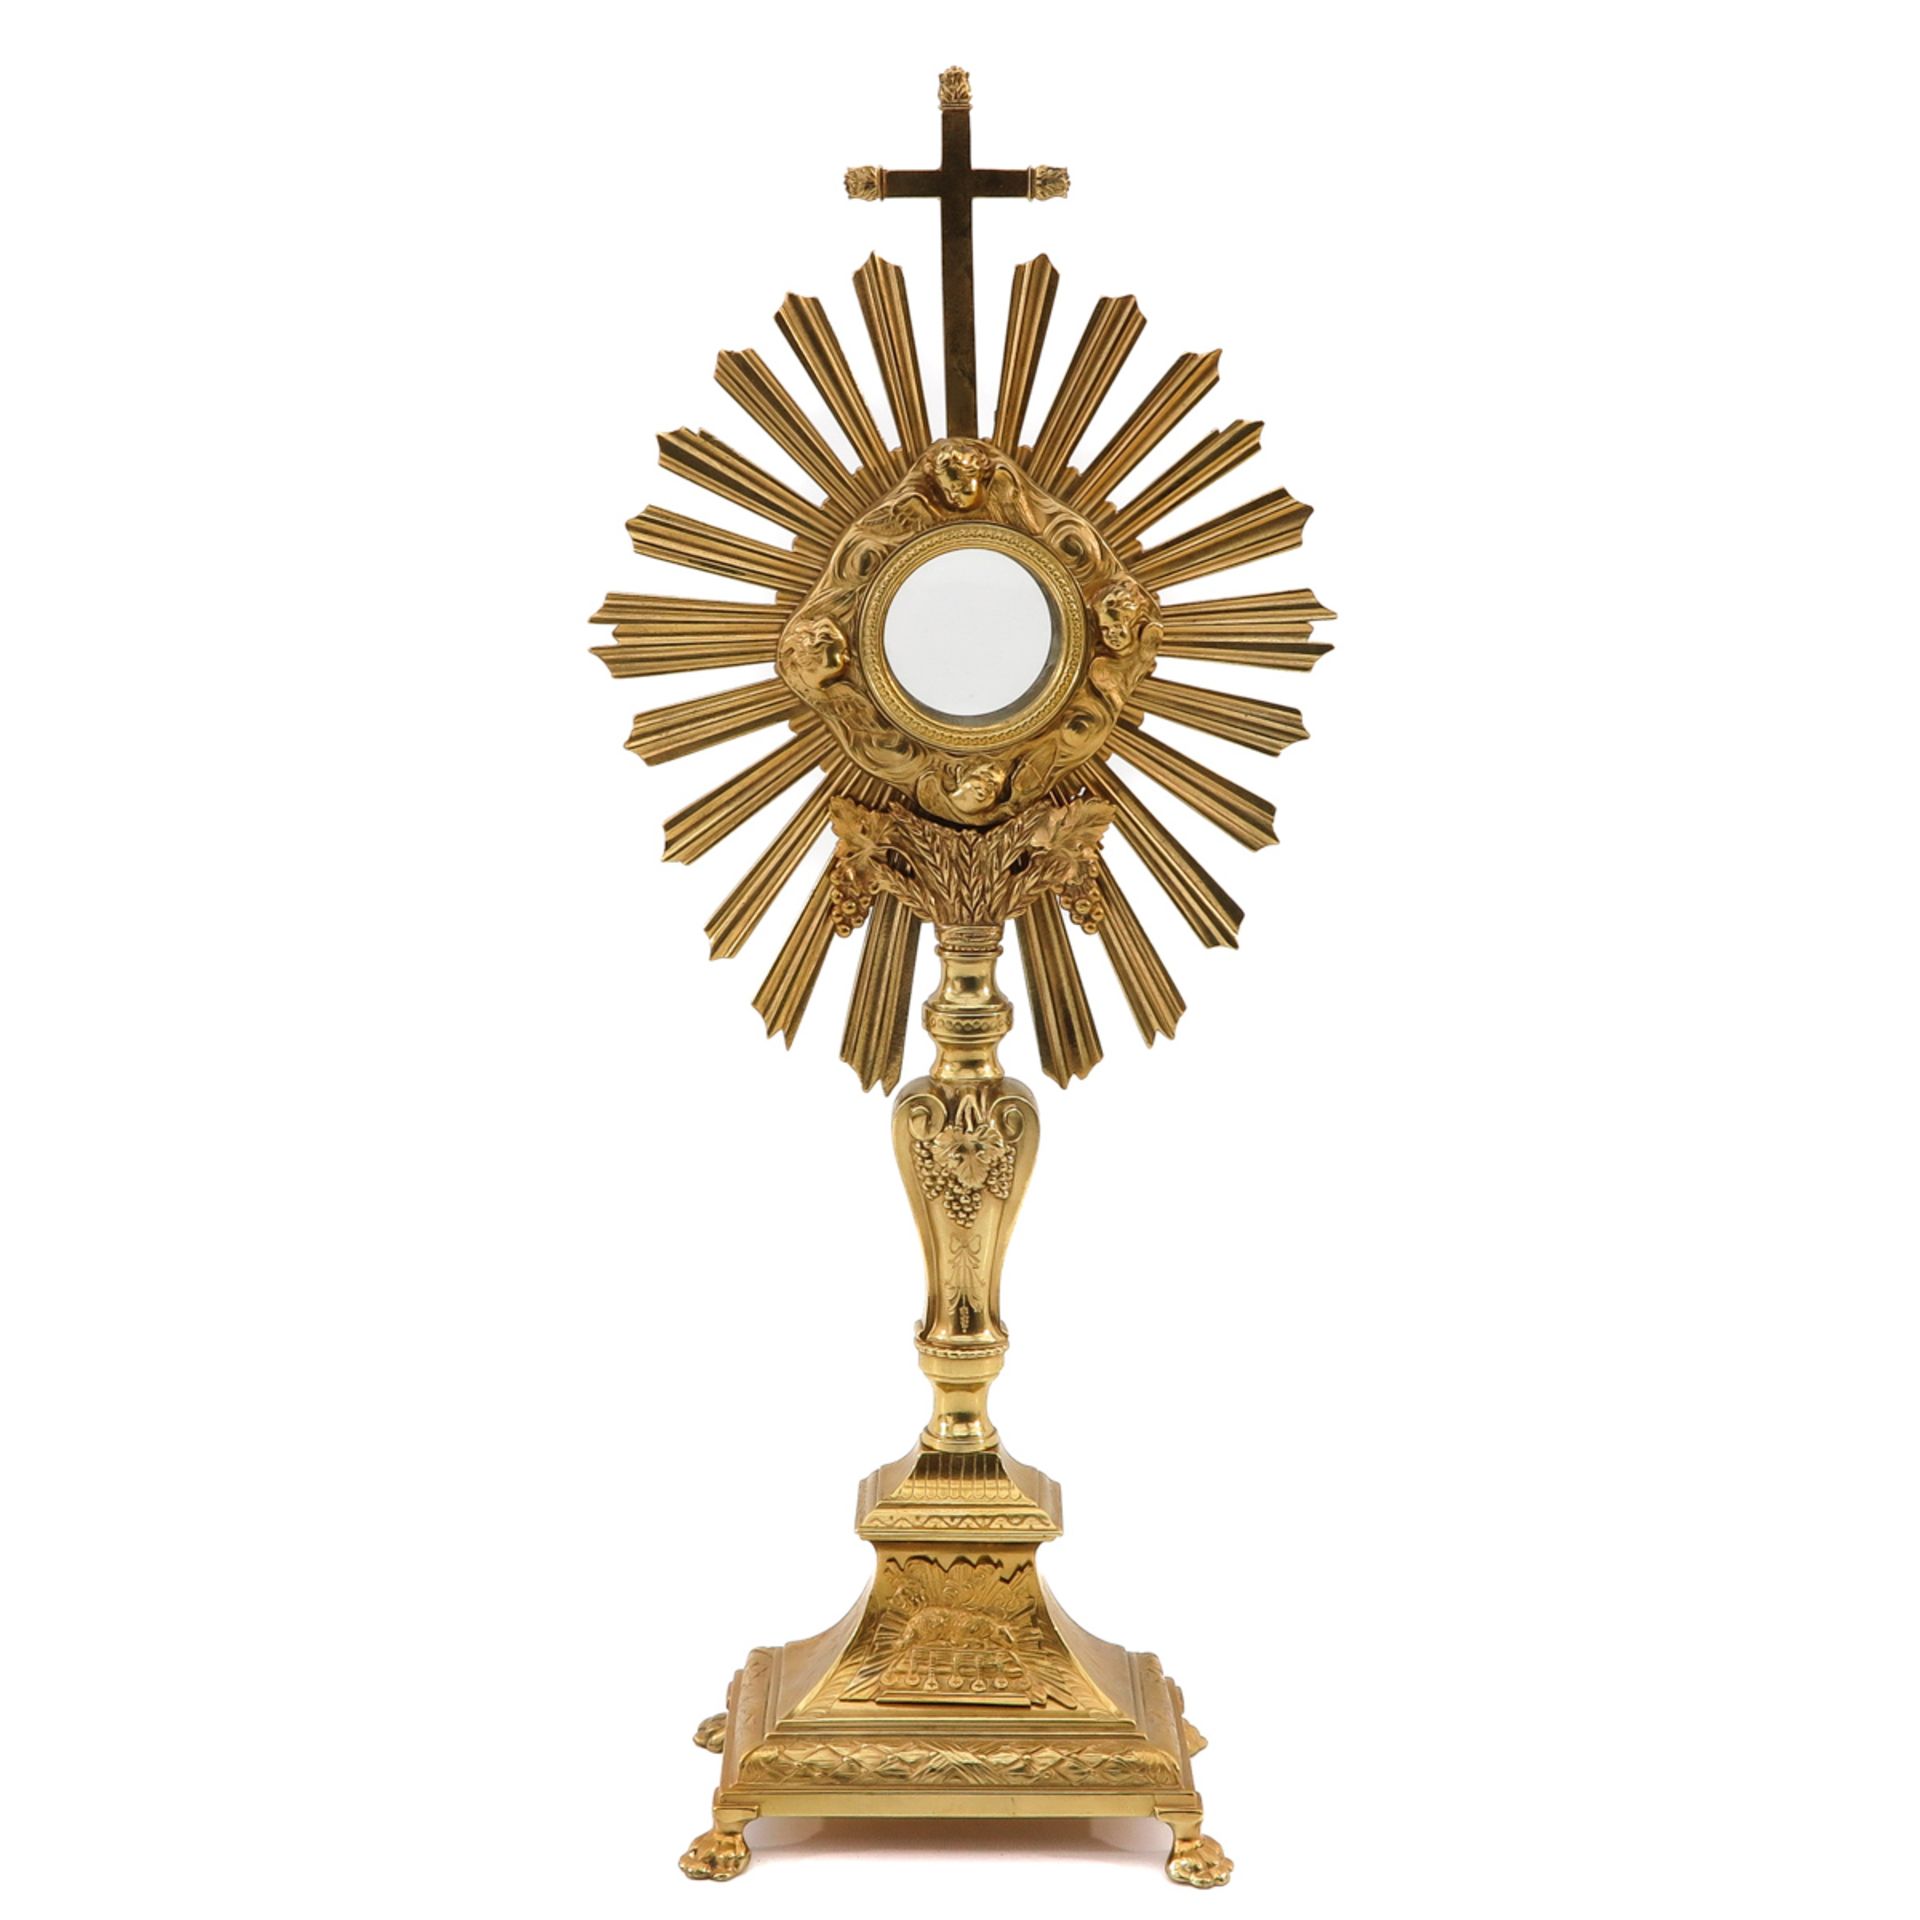 A Gold Plated Copper Monstrance